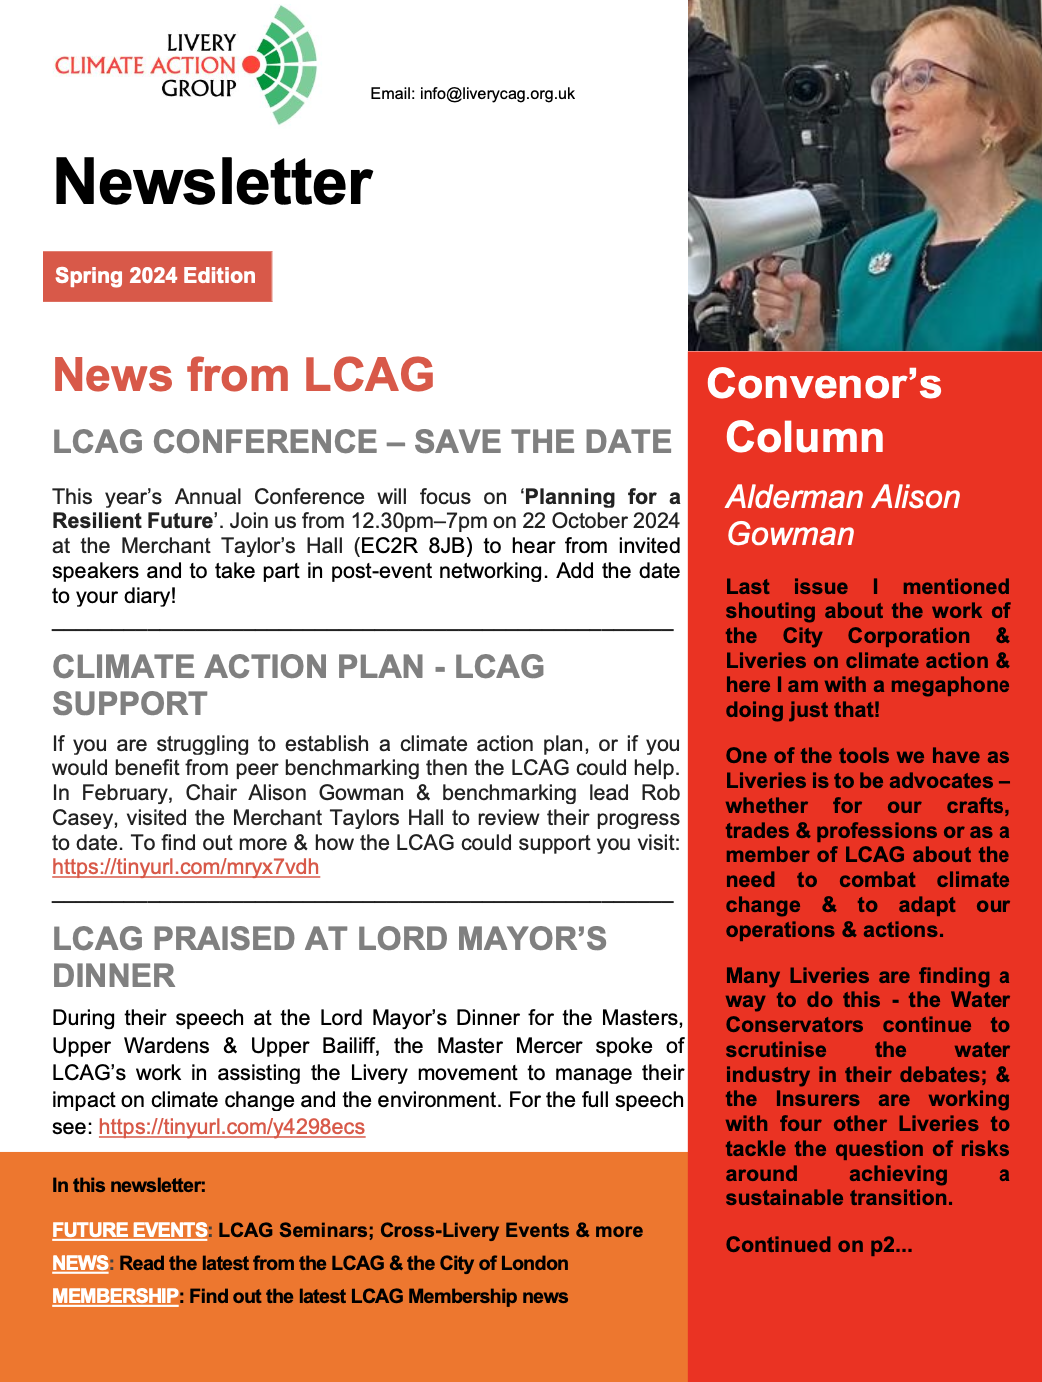 Livery Climate Action Group Newsletter: Spring 2024 Edition